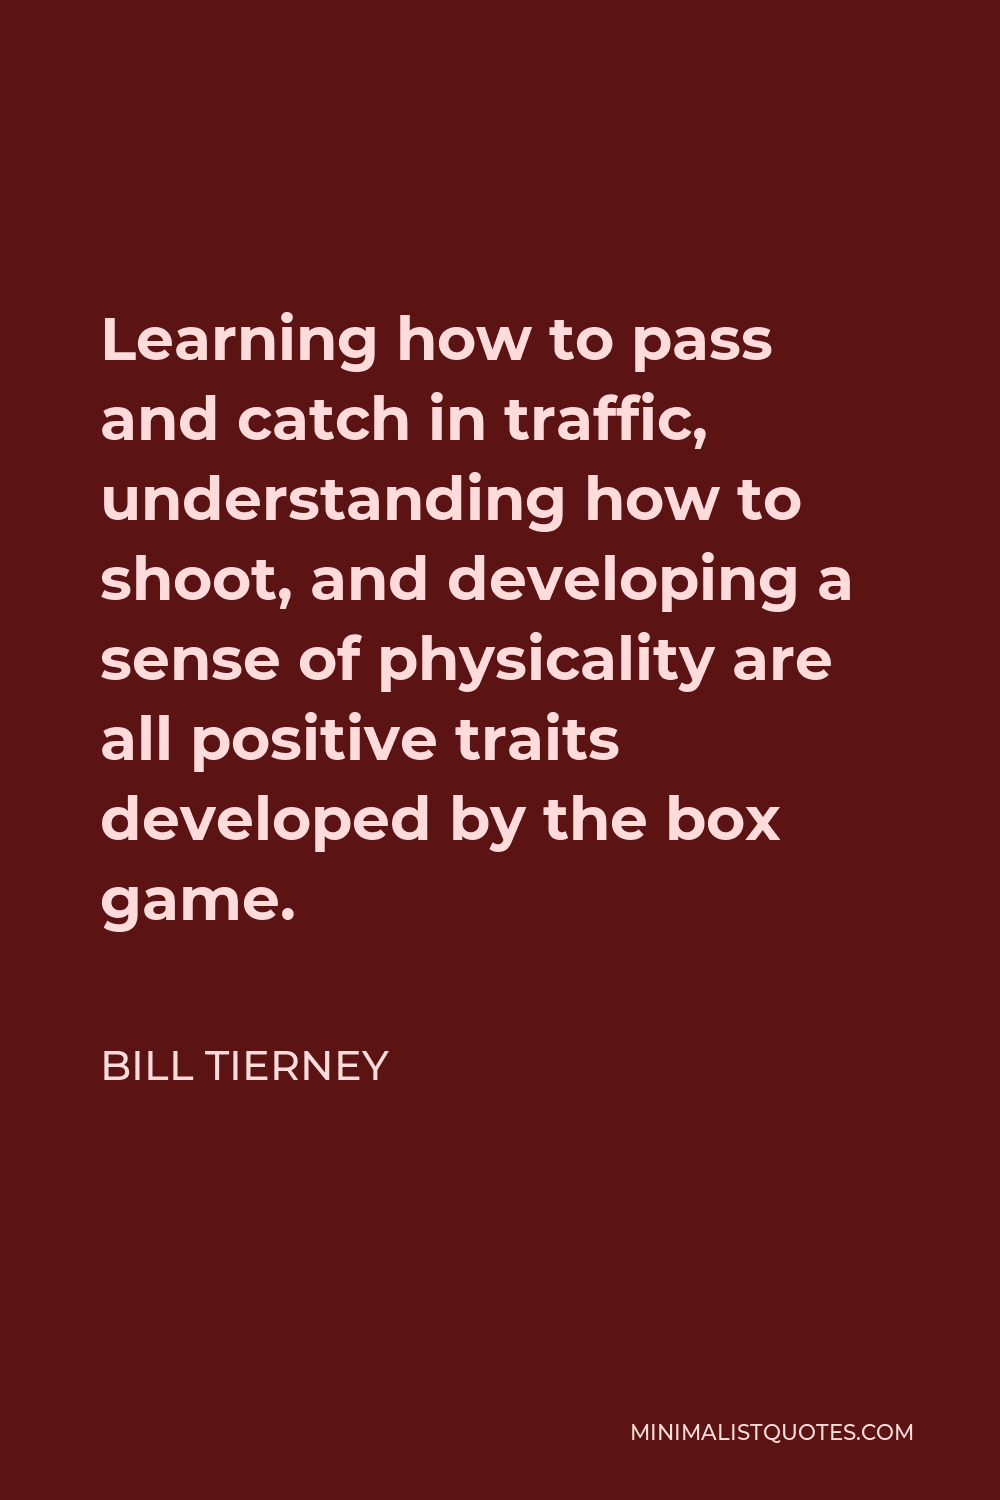 Bill Tierney Quote - Learning how to pass and catch in traffic, understanding how to shoot, and developing a sense of physicality are all positive traits developed by the box game.